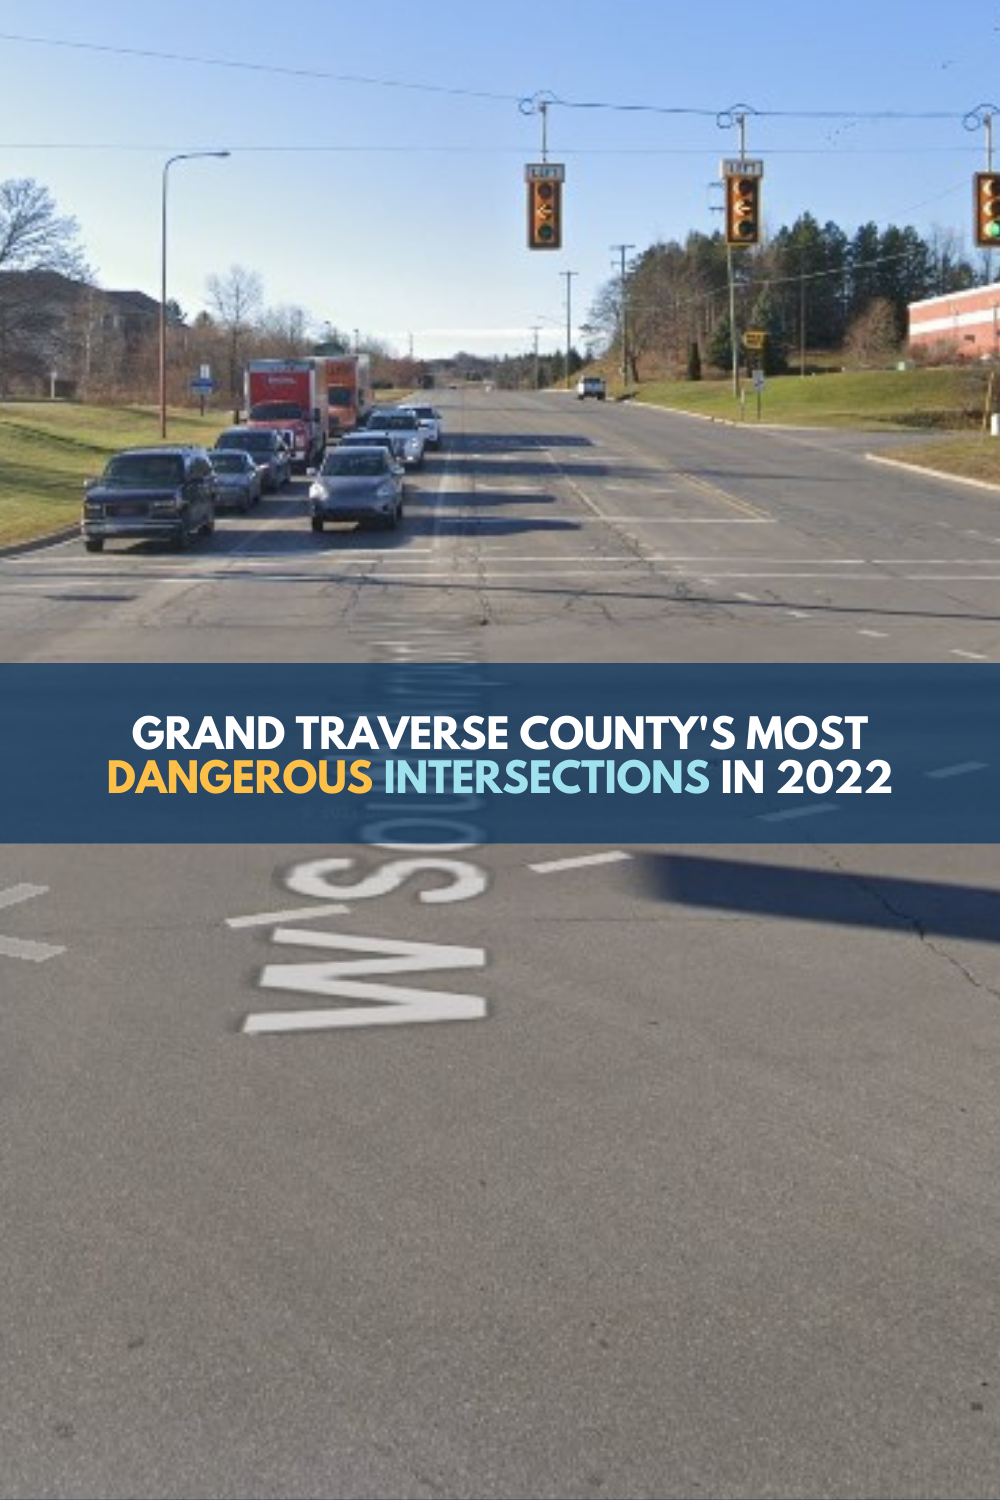 Grand Traverse County’s Most Dangerous Intersections in 2022